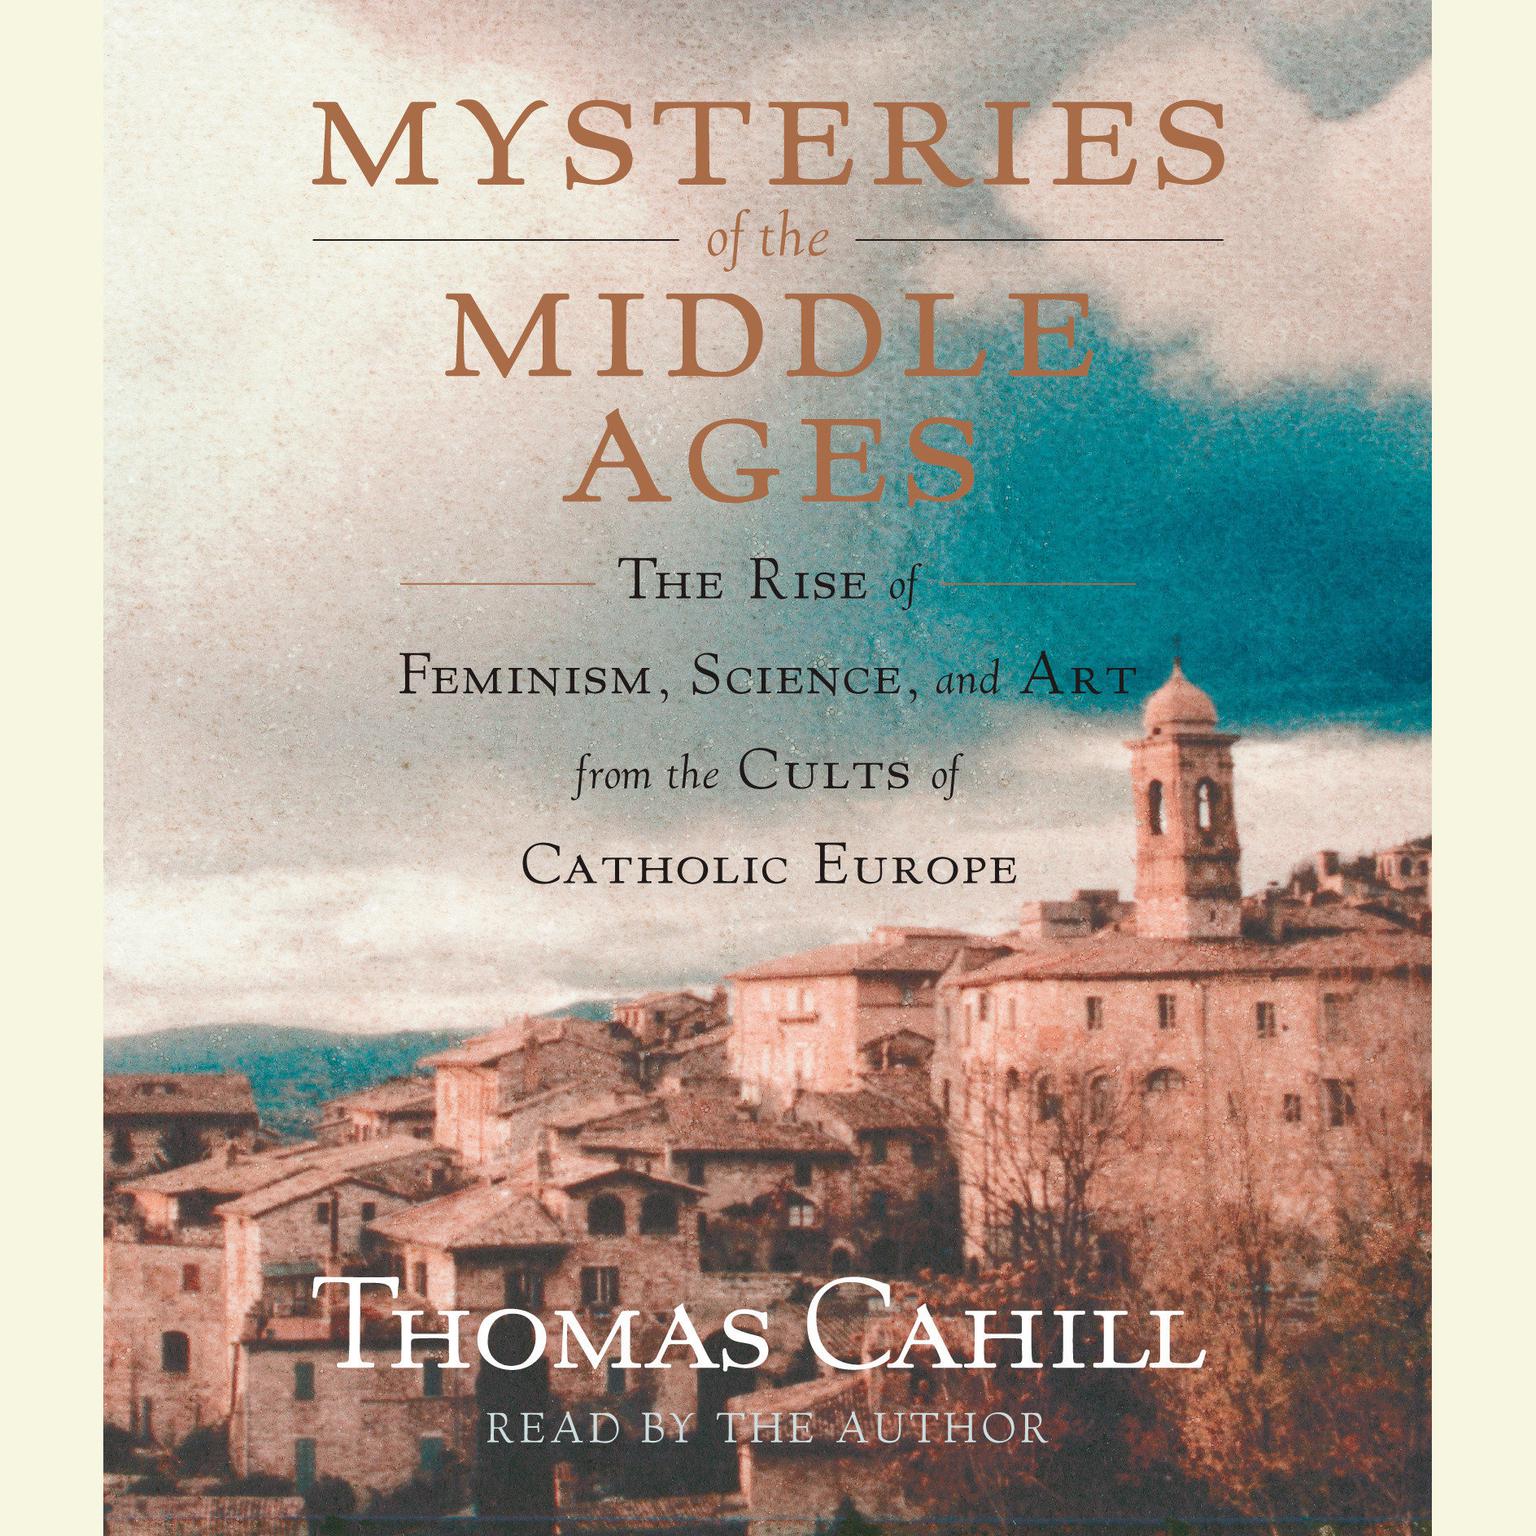 Mysteries of the Middle Ages (Abridged): The Rise of Feminism, Science and Art from the Cults of Catholic Europe Audiobook, by Thomas Cahill